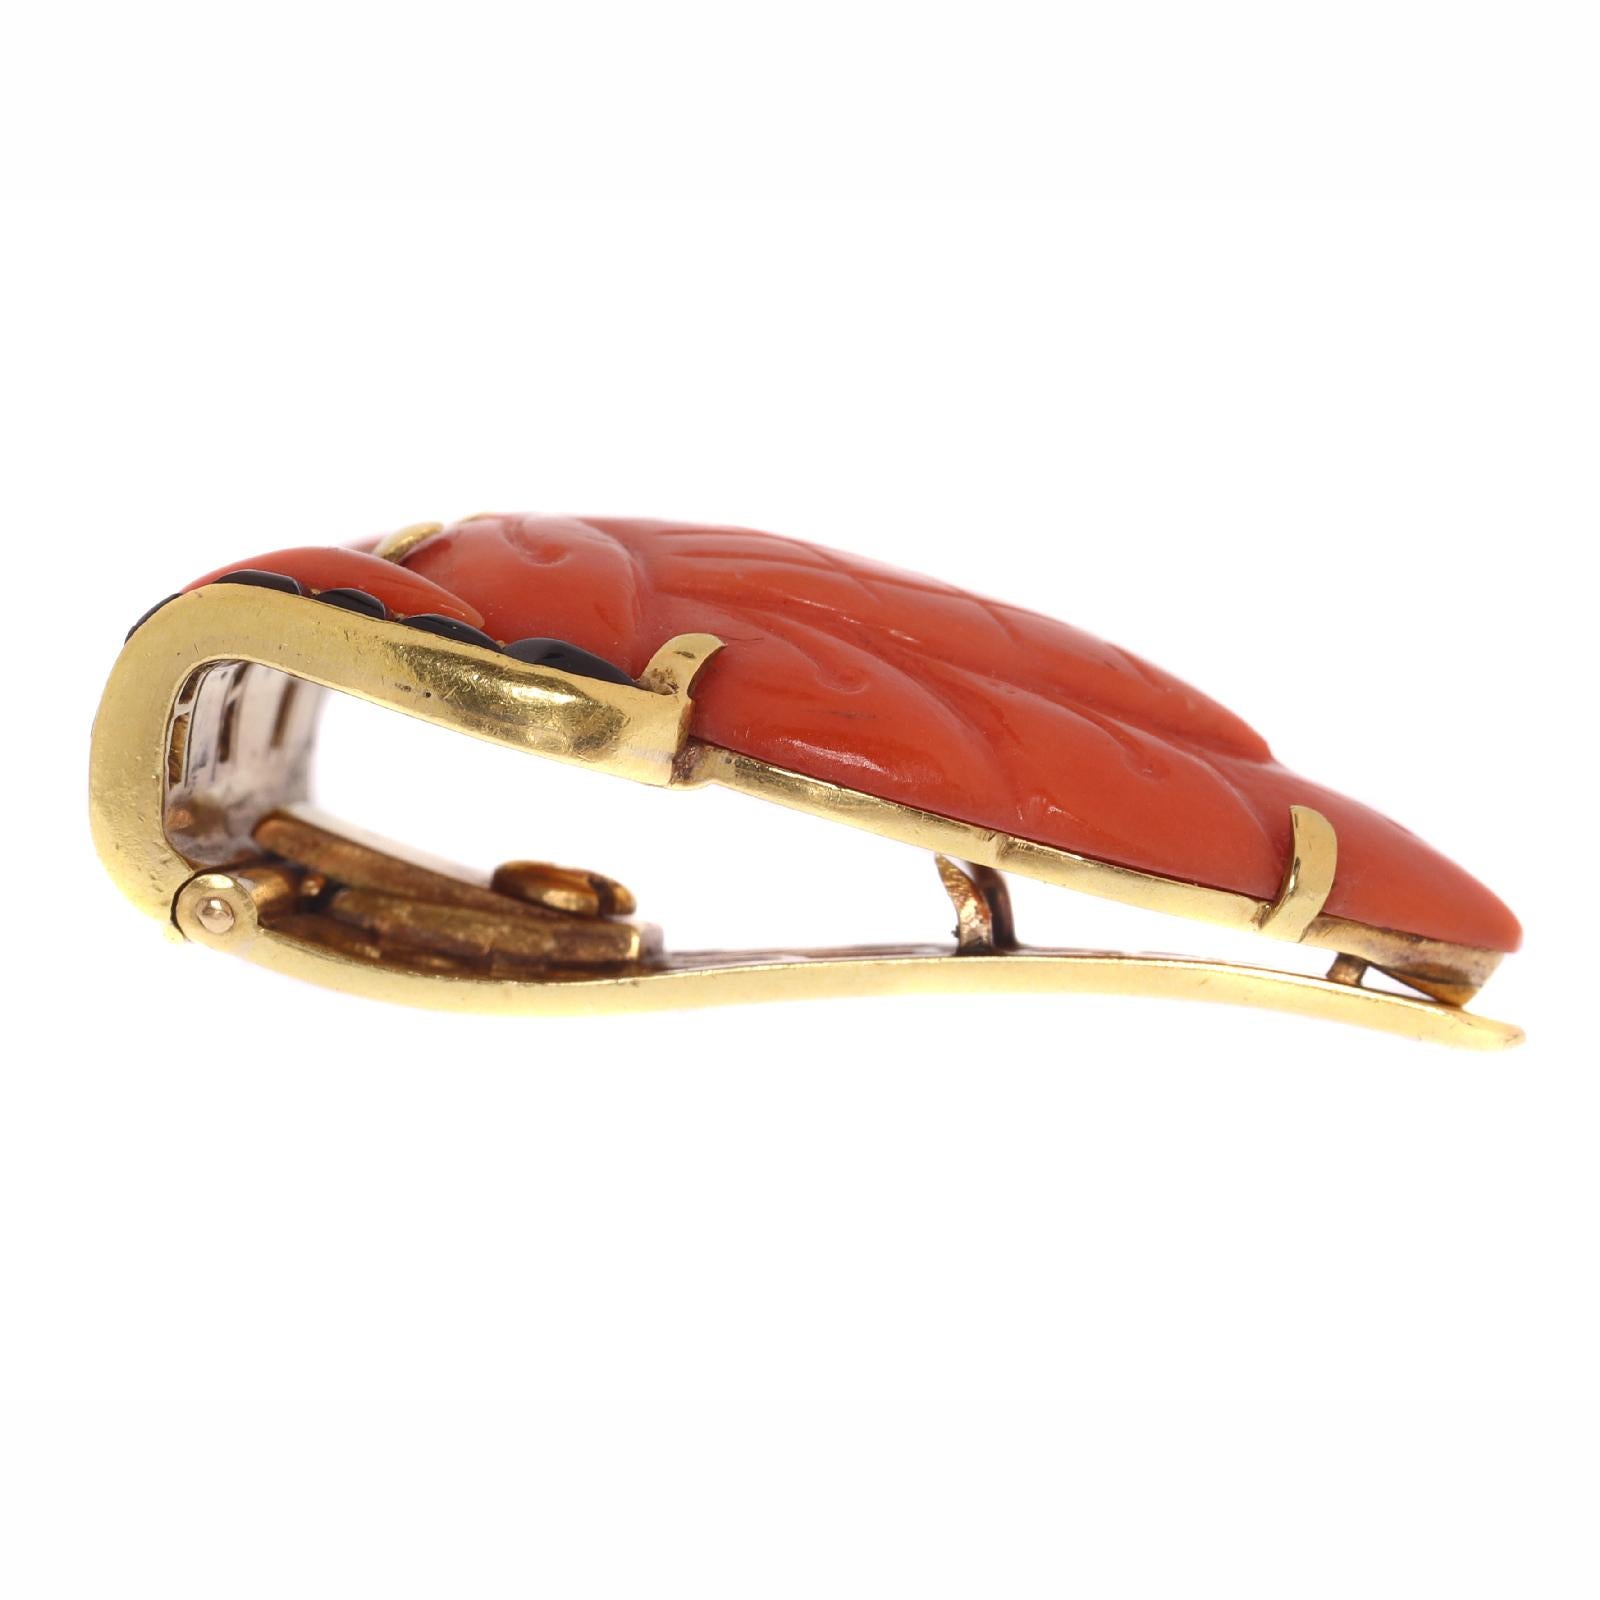 Truly Magnificent Art Deco Clip, typical Japonism, Coral and Carre cut Onyx For Sale 5